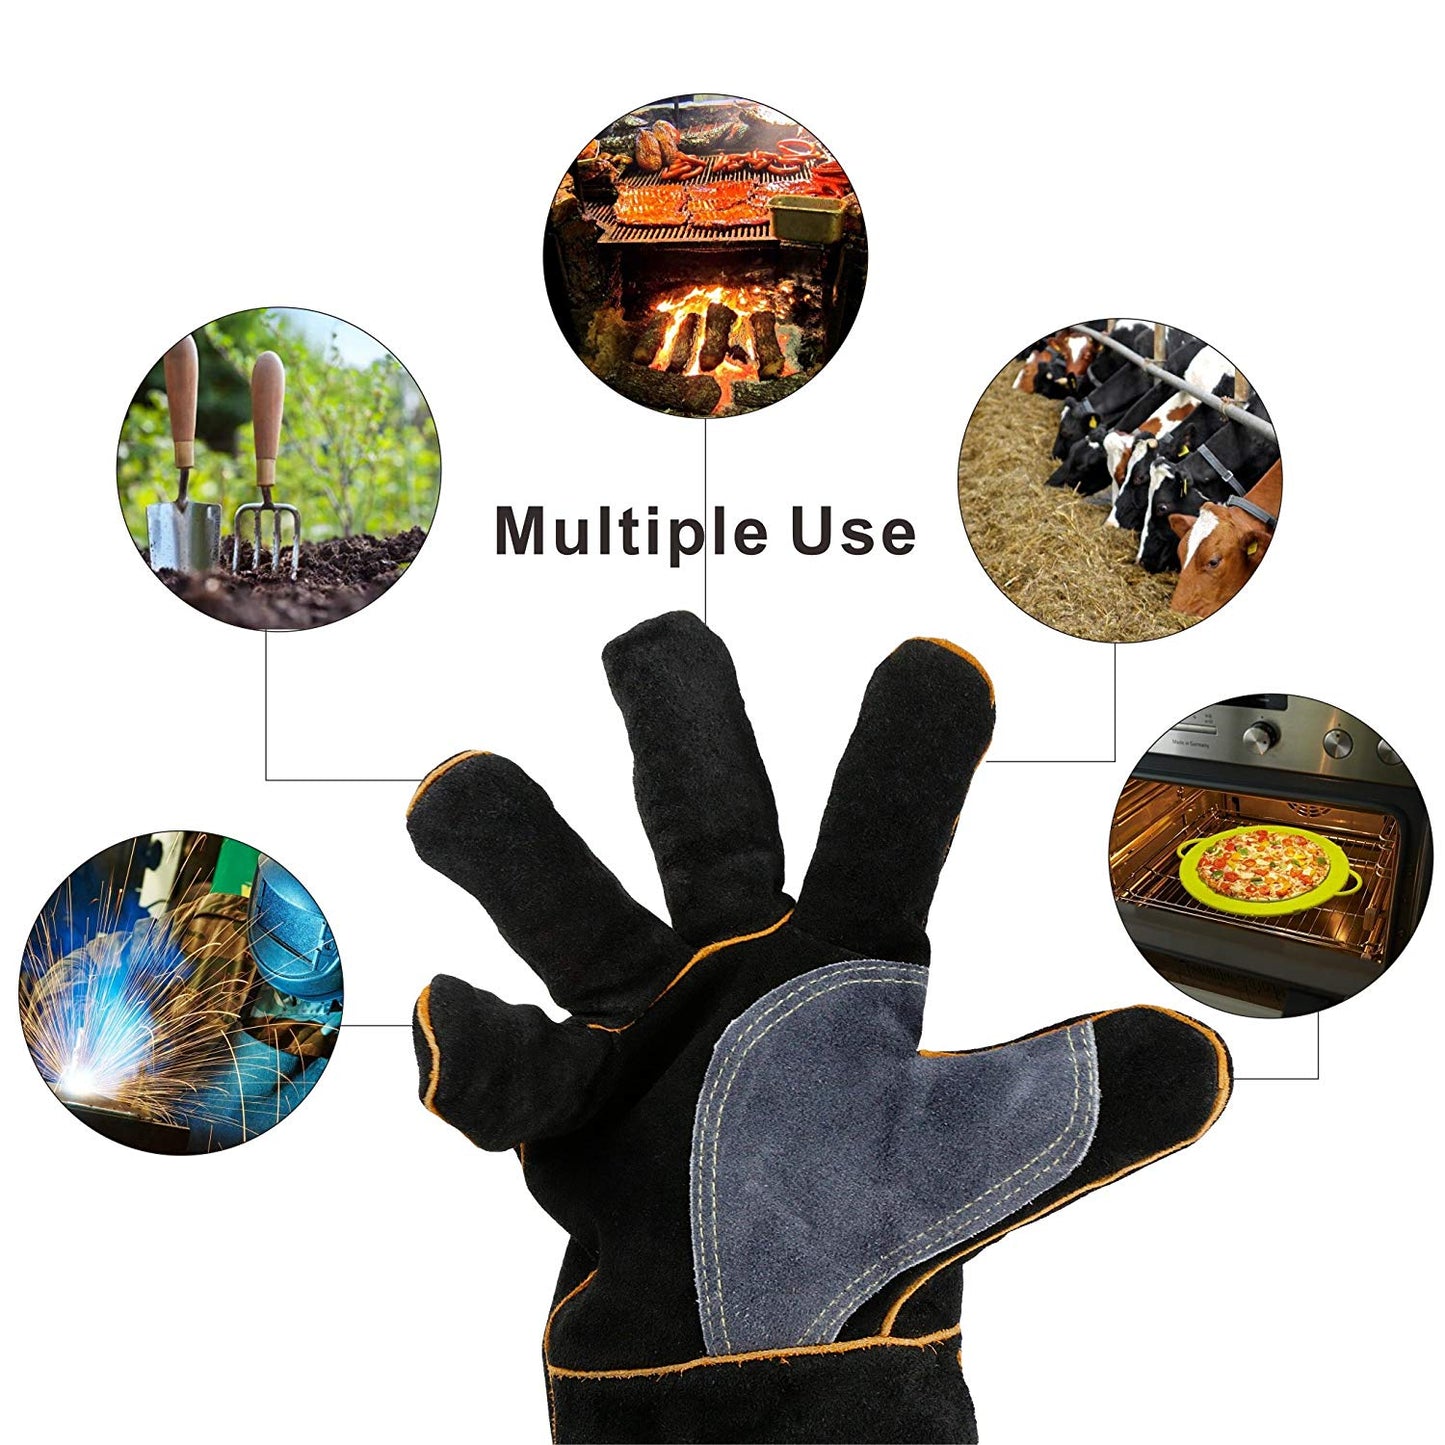 1 Pair 482°F Welding Gloves With Soft Lining, Mig/Stick Welder Heat/Fire Resistant, Mitts For Oven/Grill/Fireplace/Furnace/Stove/Pot Holder/Tig Welder